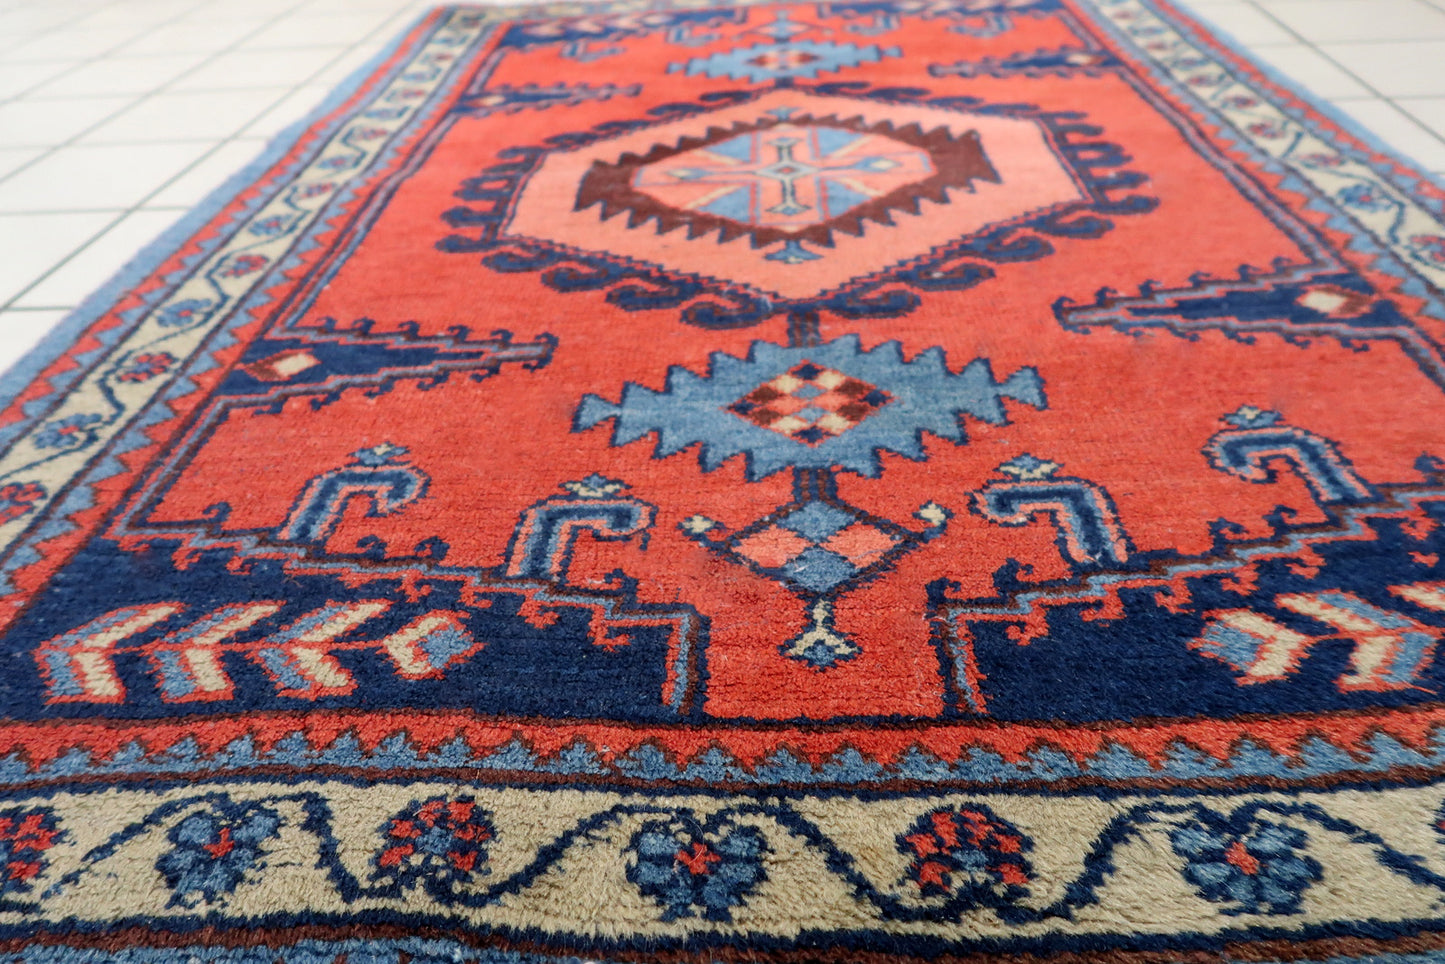 Handmade vintage rug in bright red color from Persian Hamadan region. The rug is from the end of 20th century in original good condition.